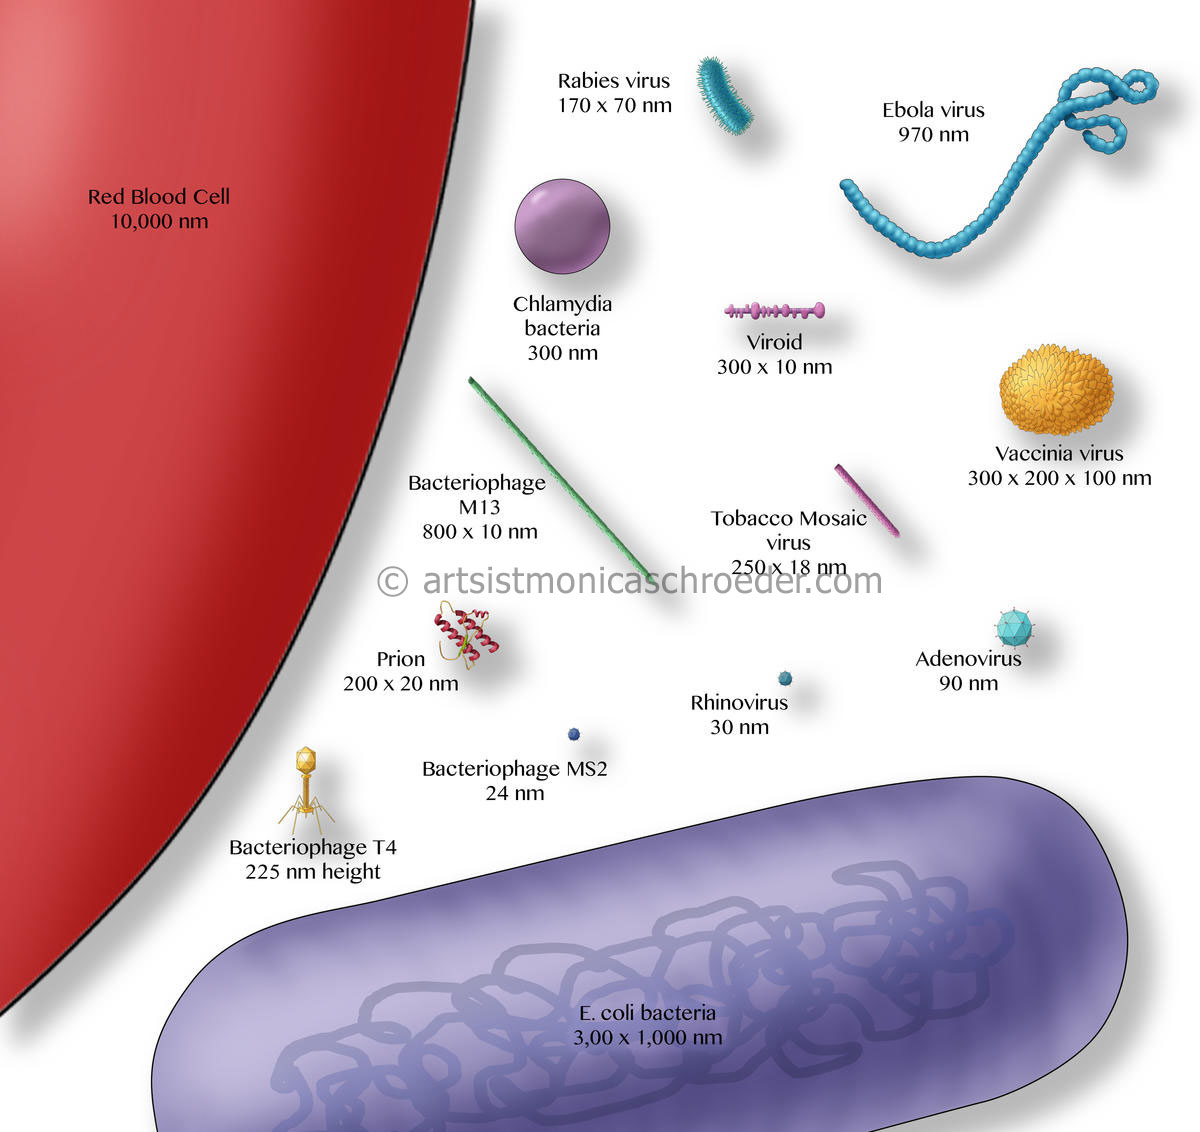 Comparative Sizes of Bacteria and Viruses